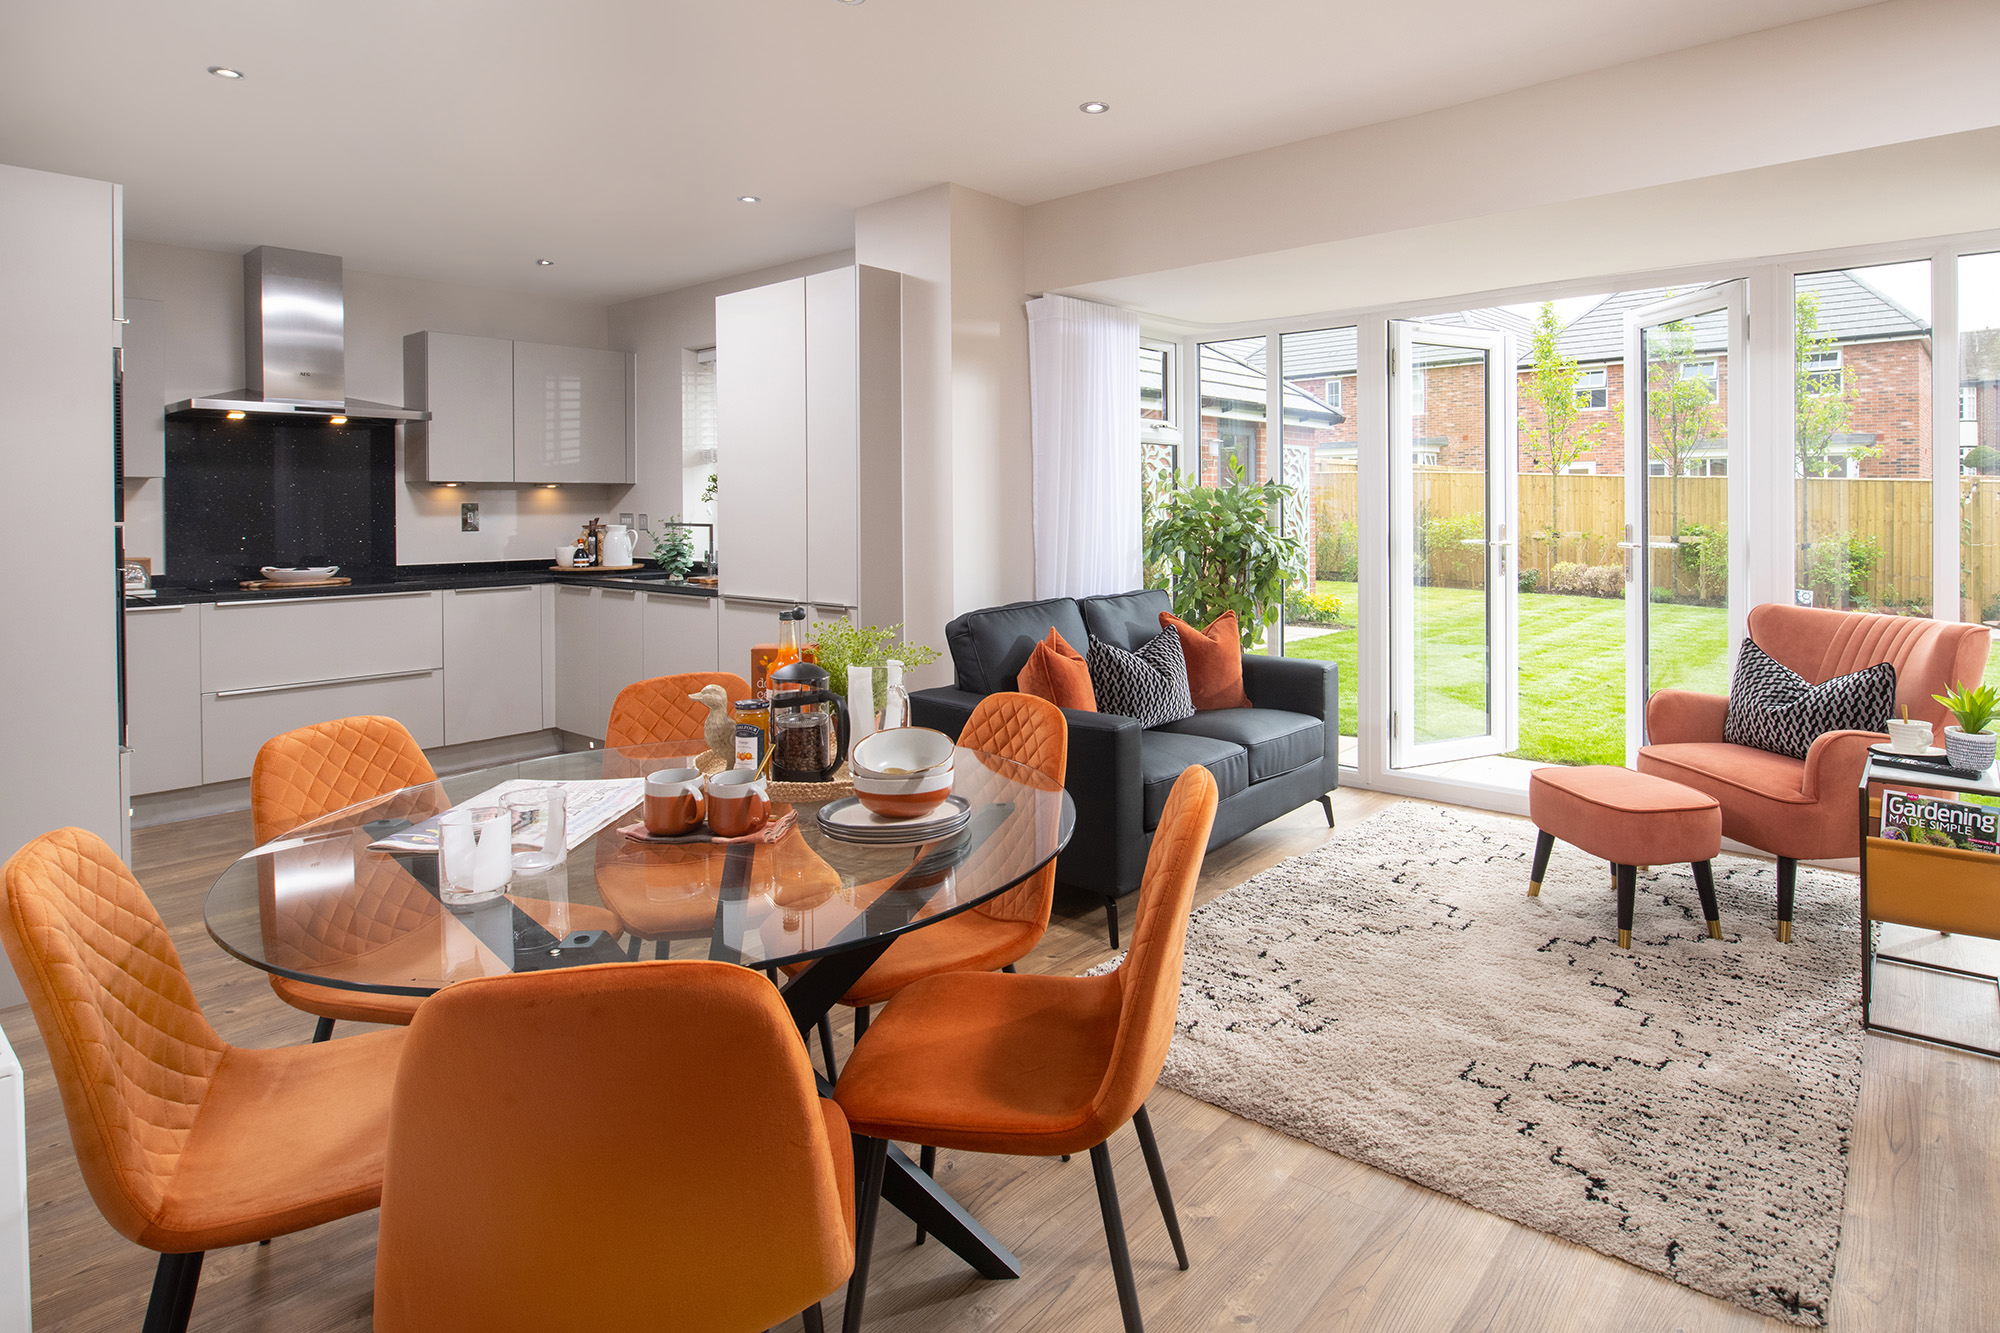 Property 2 of 9. The Winstone Show Home - Kings Park